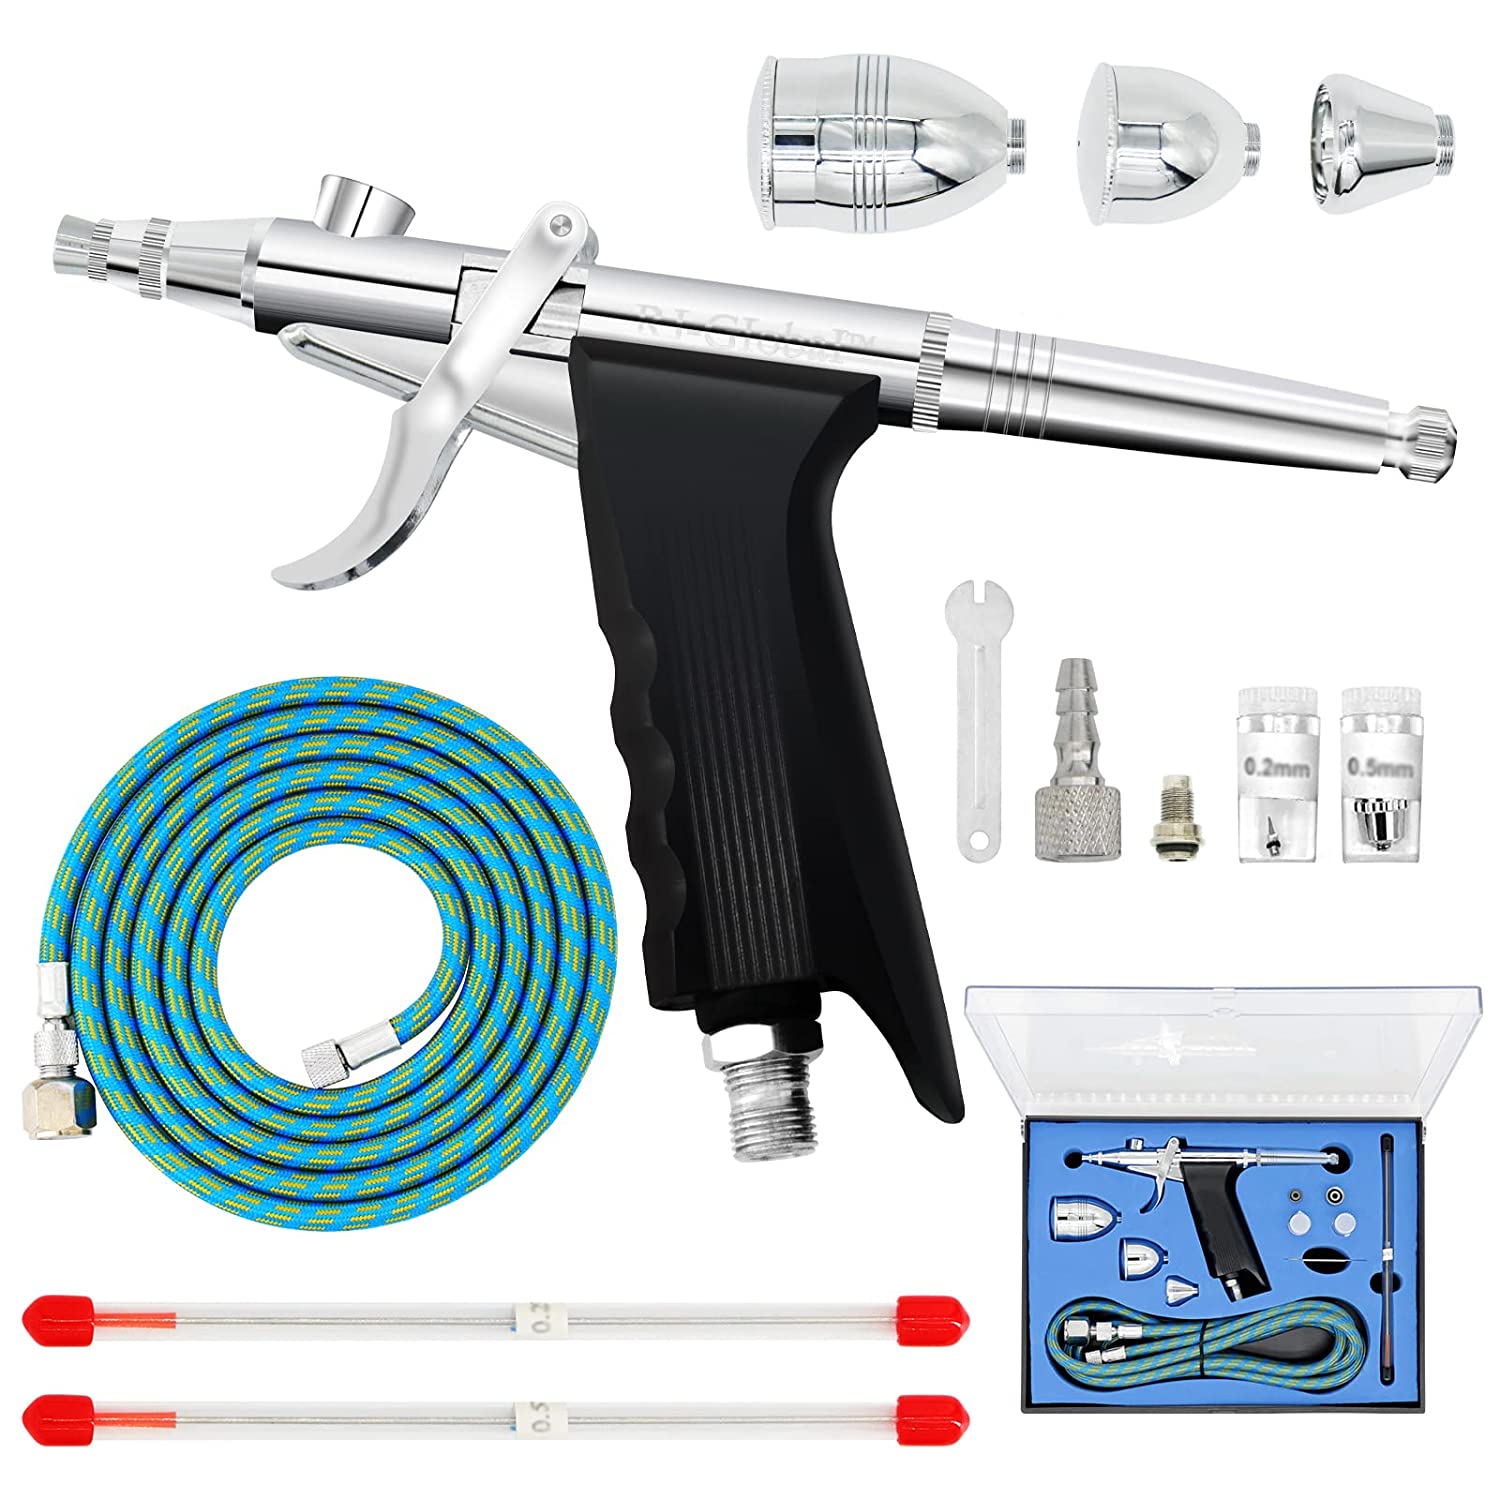 Double Action Airbrush Kit Air Brush Spray Tool with 0.3mm/0.2mm/0.5mm